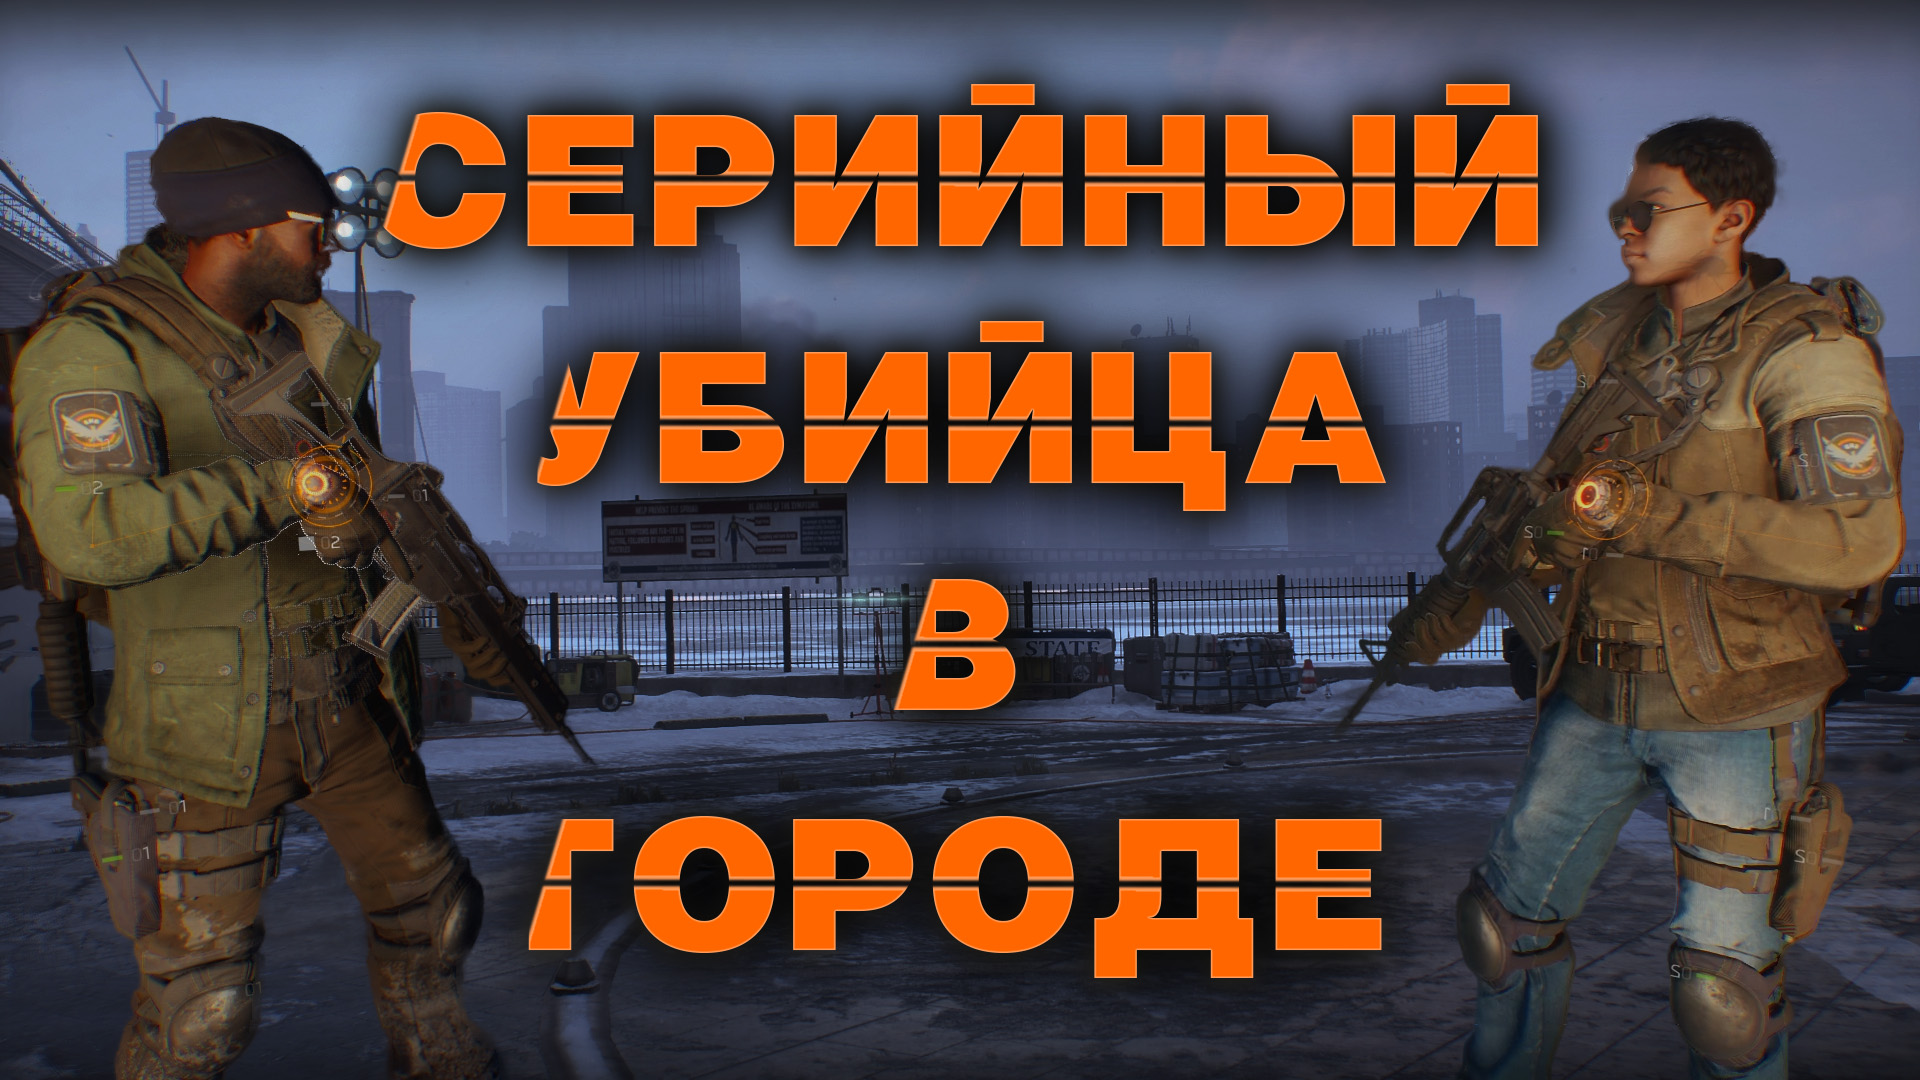 [Ep.2] Let's Play Coop - Tom Clancy's The Division - ИЗУЧАЕМ МАНХЭТТЕН!